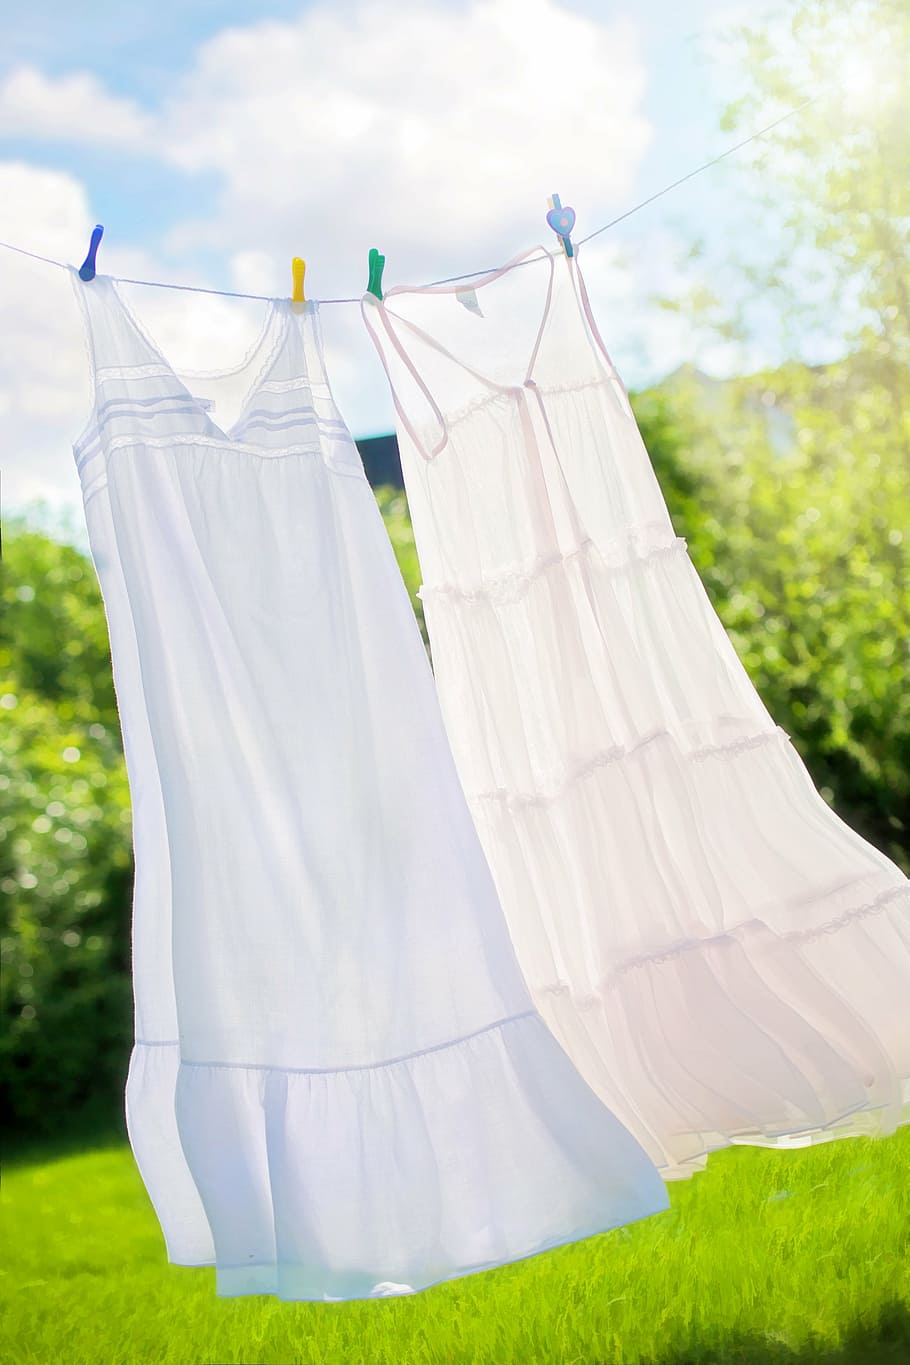 two, white, long, dresses, hanged, rope, clothesline, summer, nighties, clean